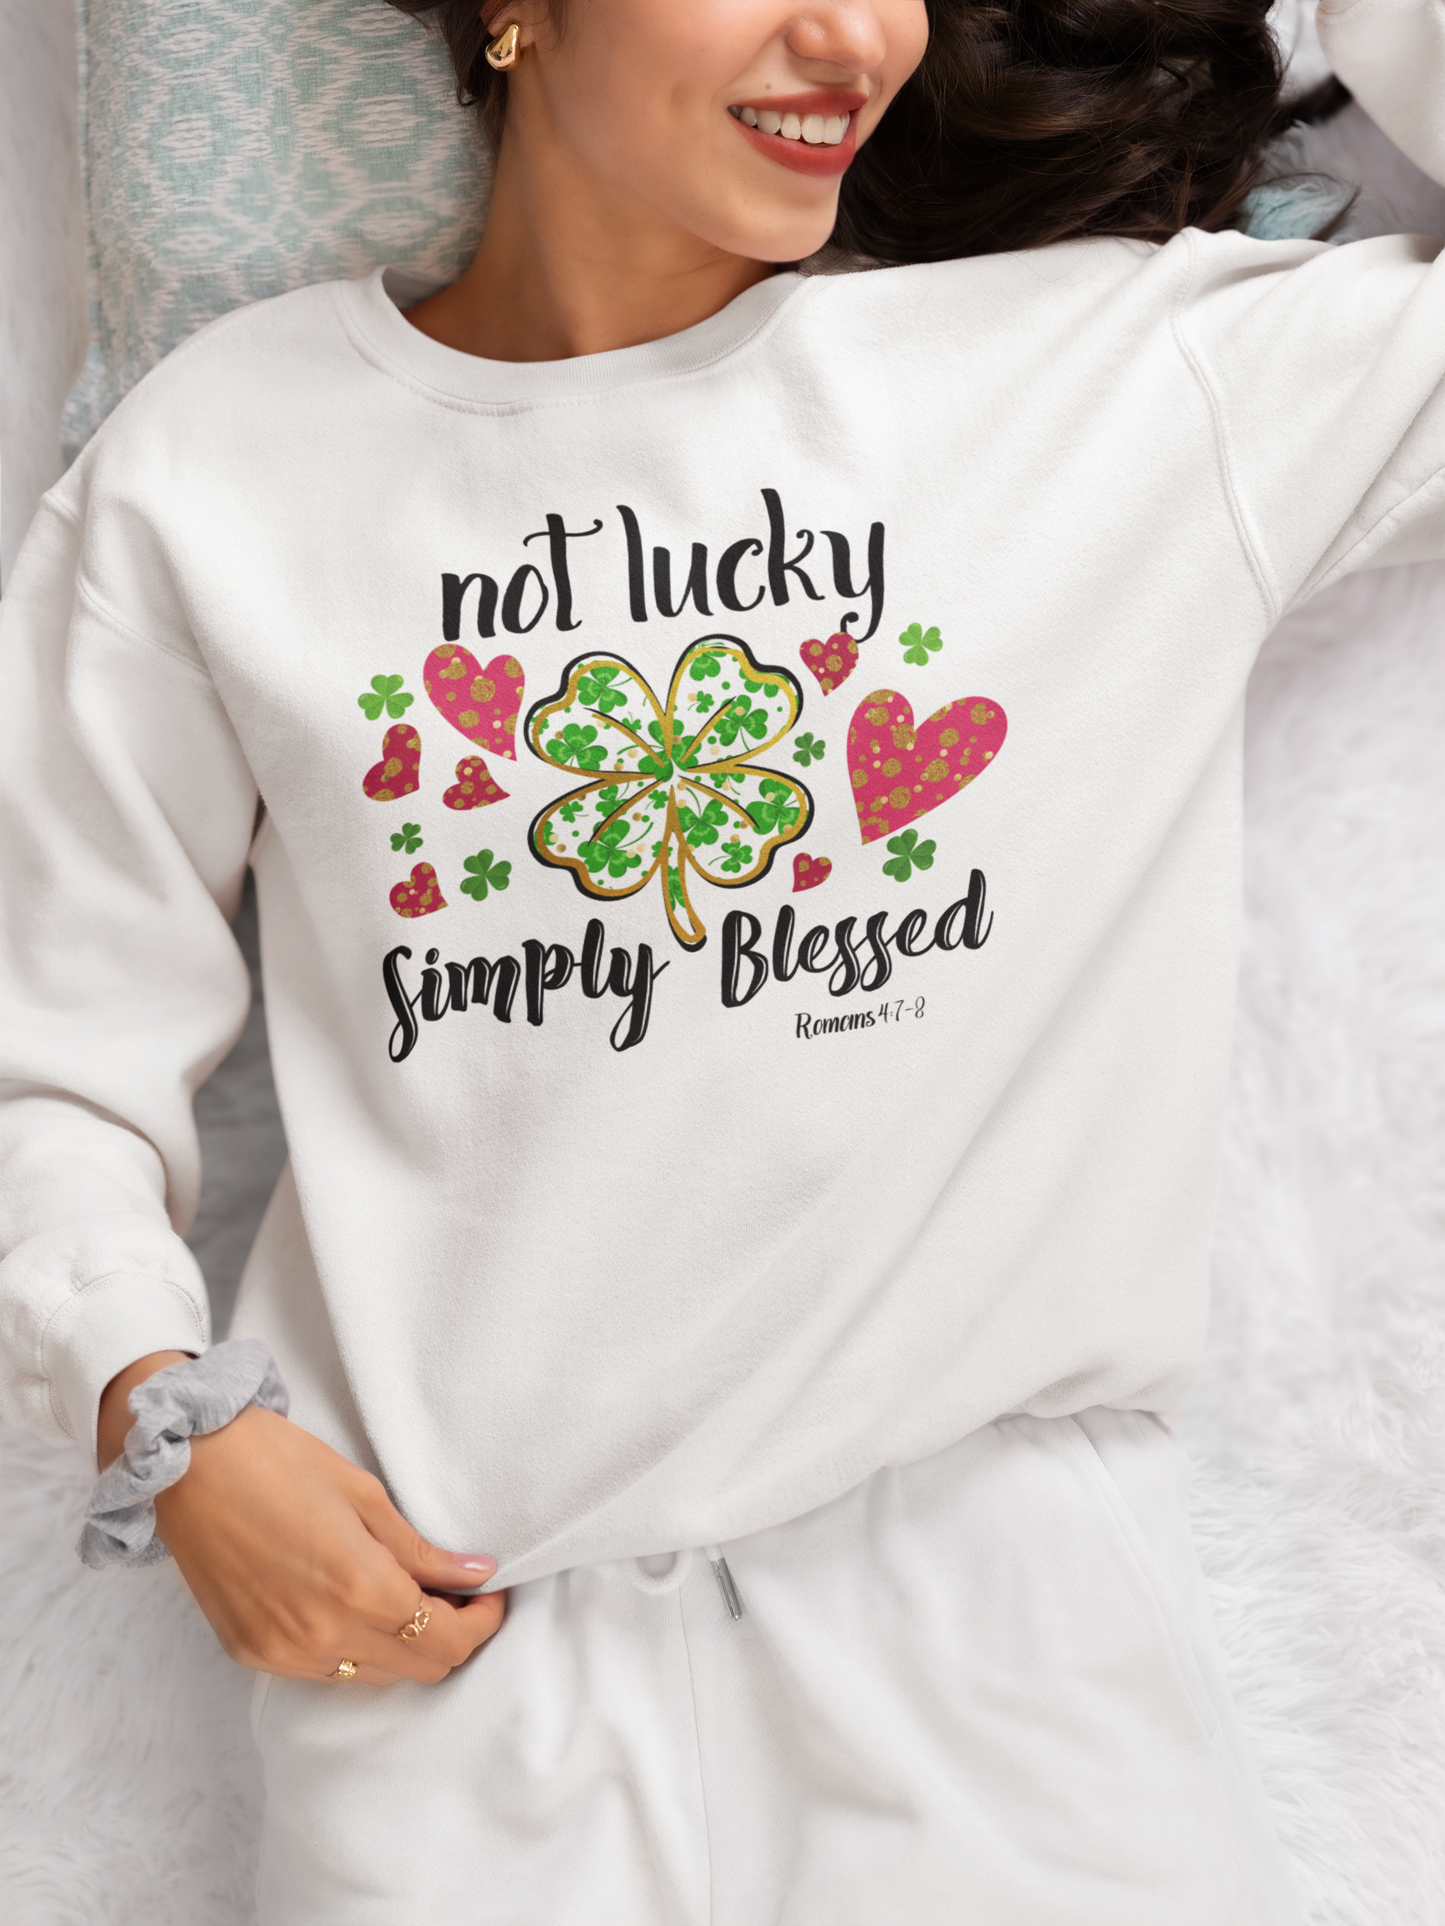 Not Lucky Simply Blessed St Patrick's Day Shirt, Four Leaf Clover Shirt, St Patrick’s Day Shirt, Clover Heart Shirt, Lucky and Blessed Shirt